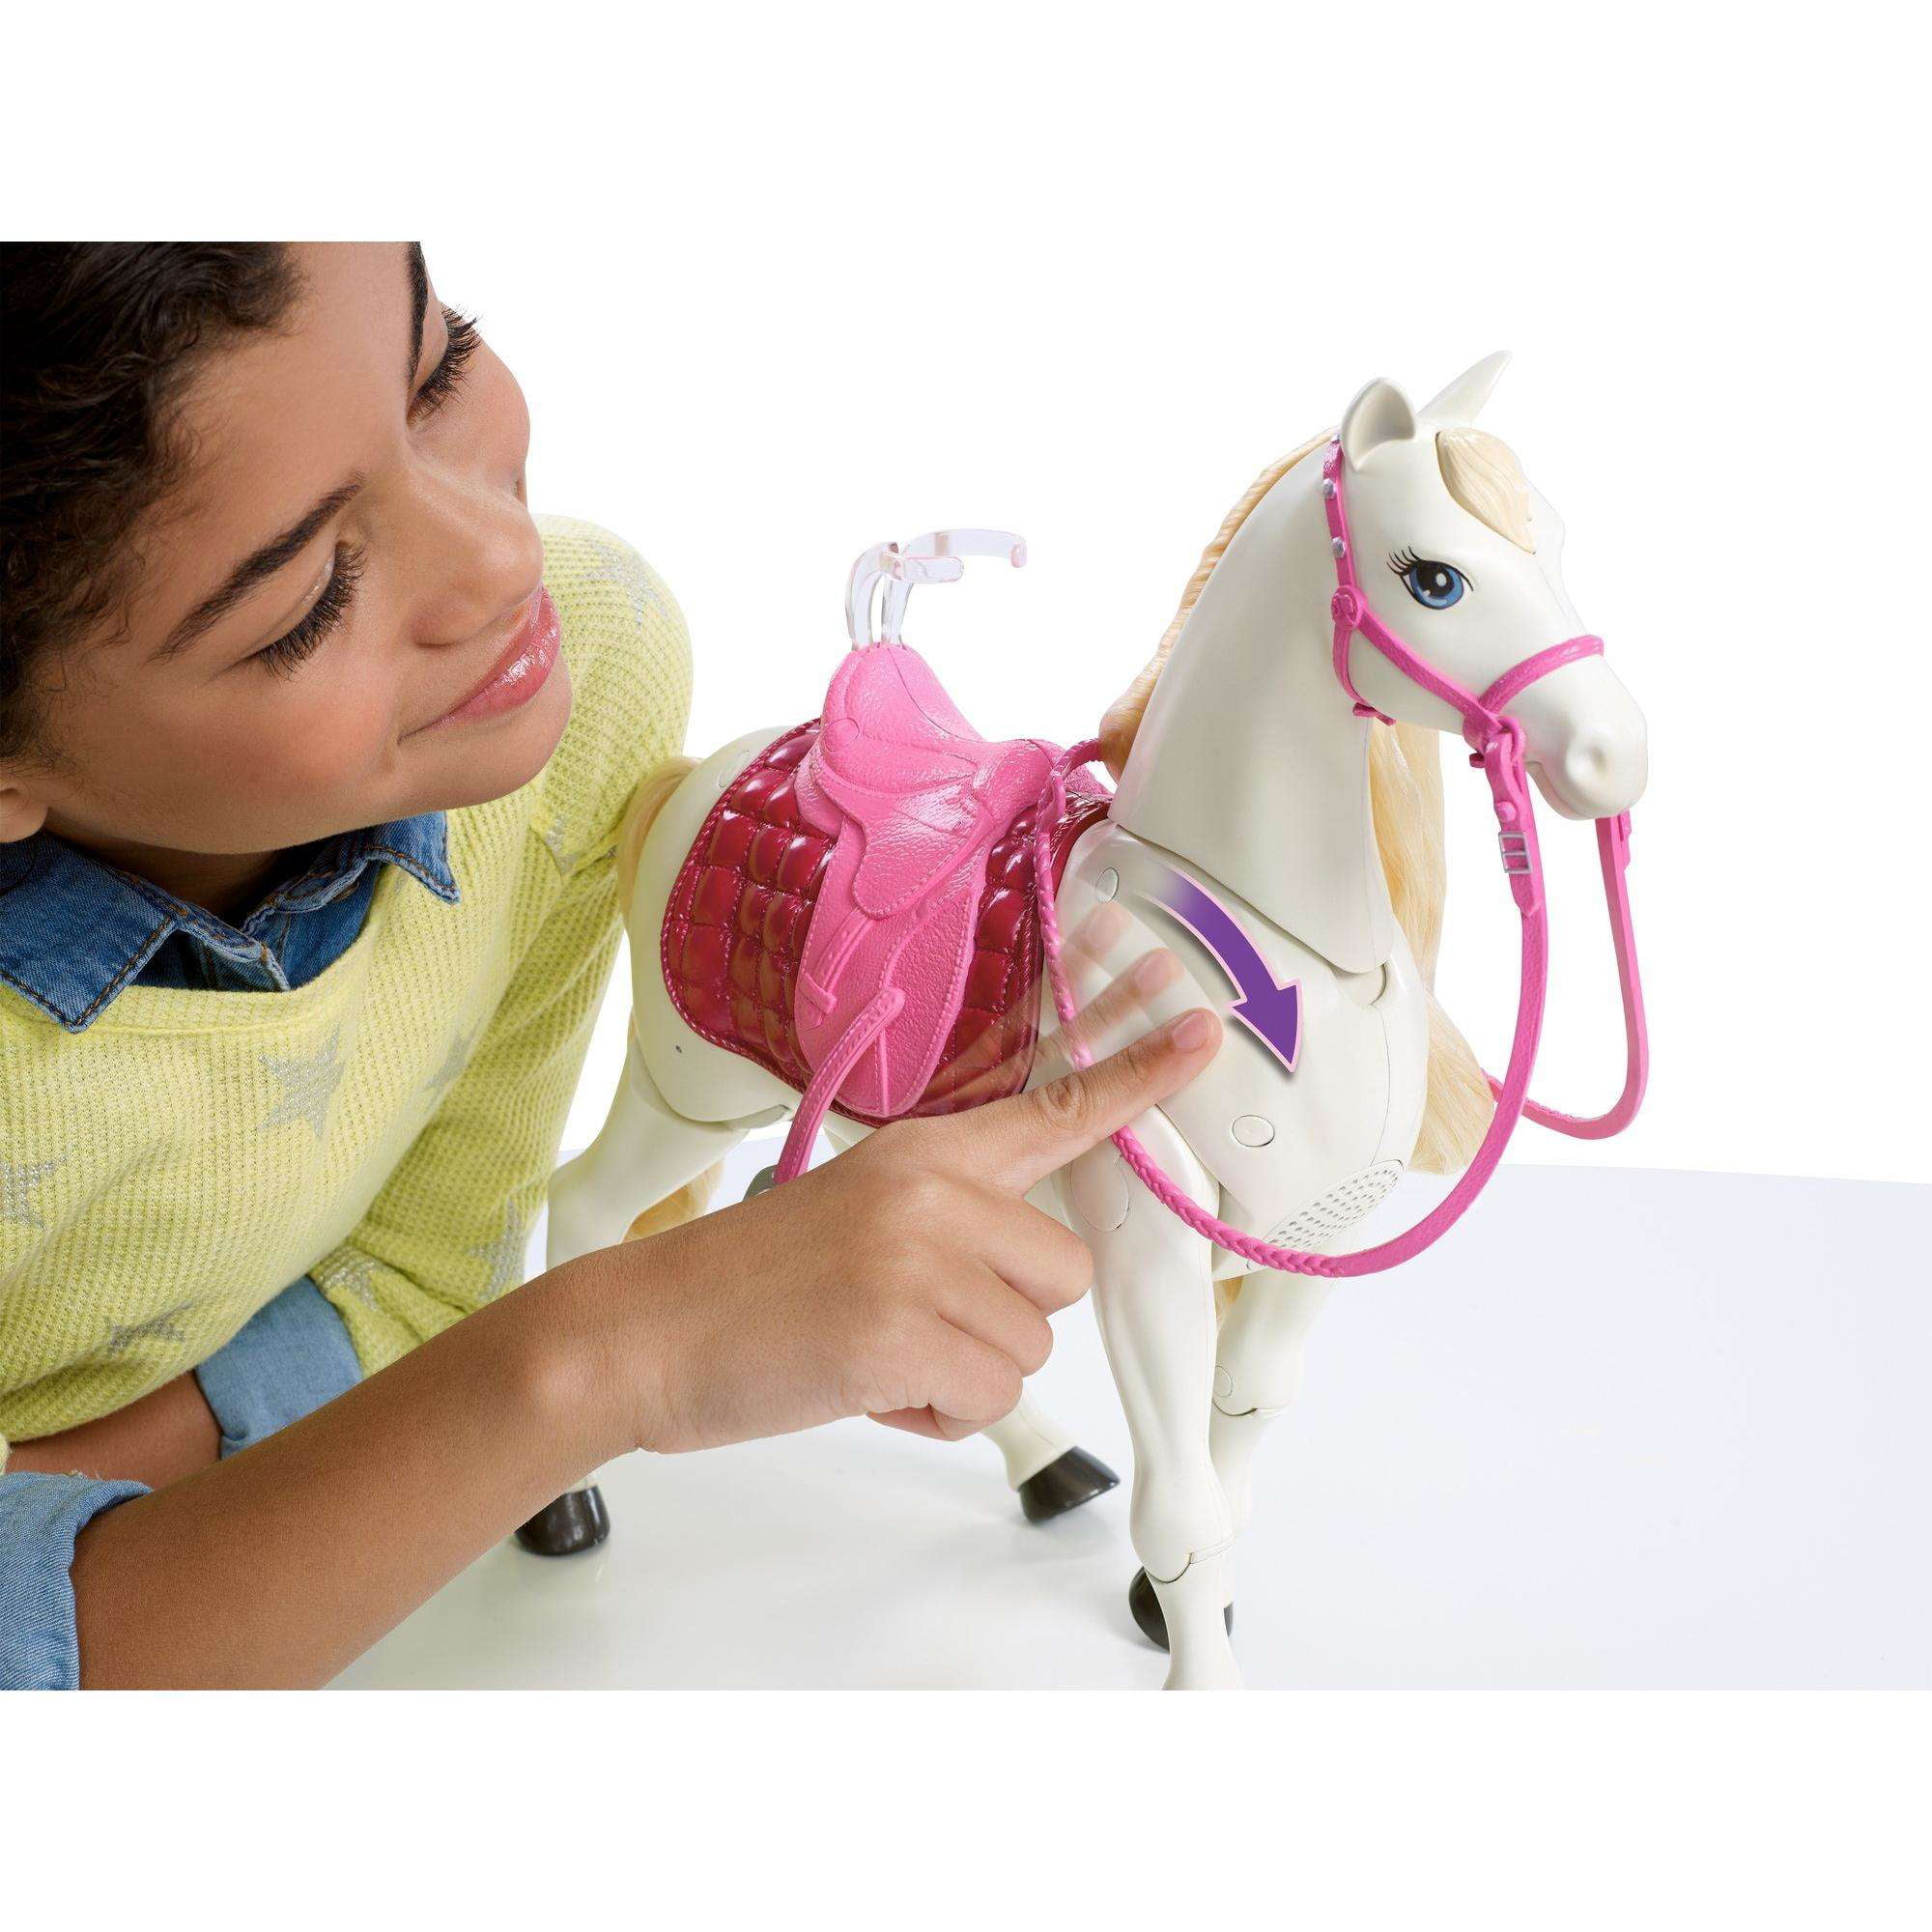 Barbie DreamHorse & Blonde Doll, Interactive Toy with 30+